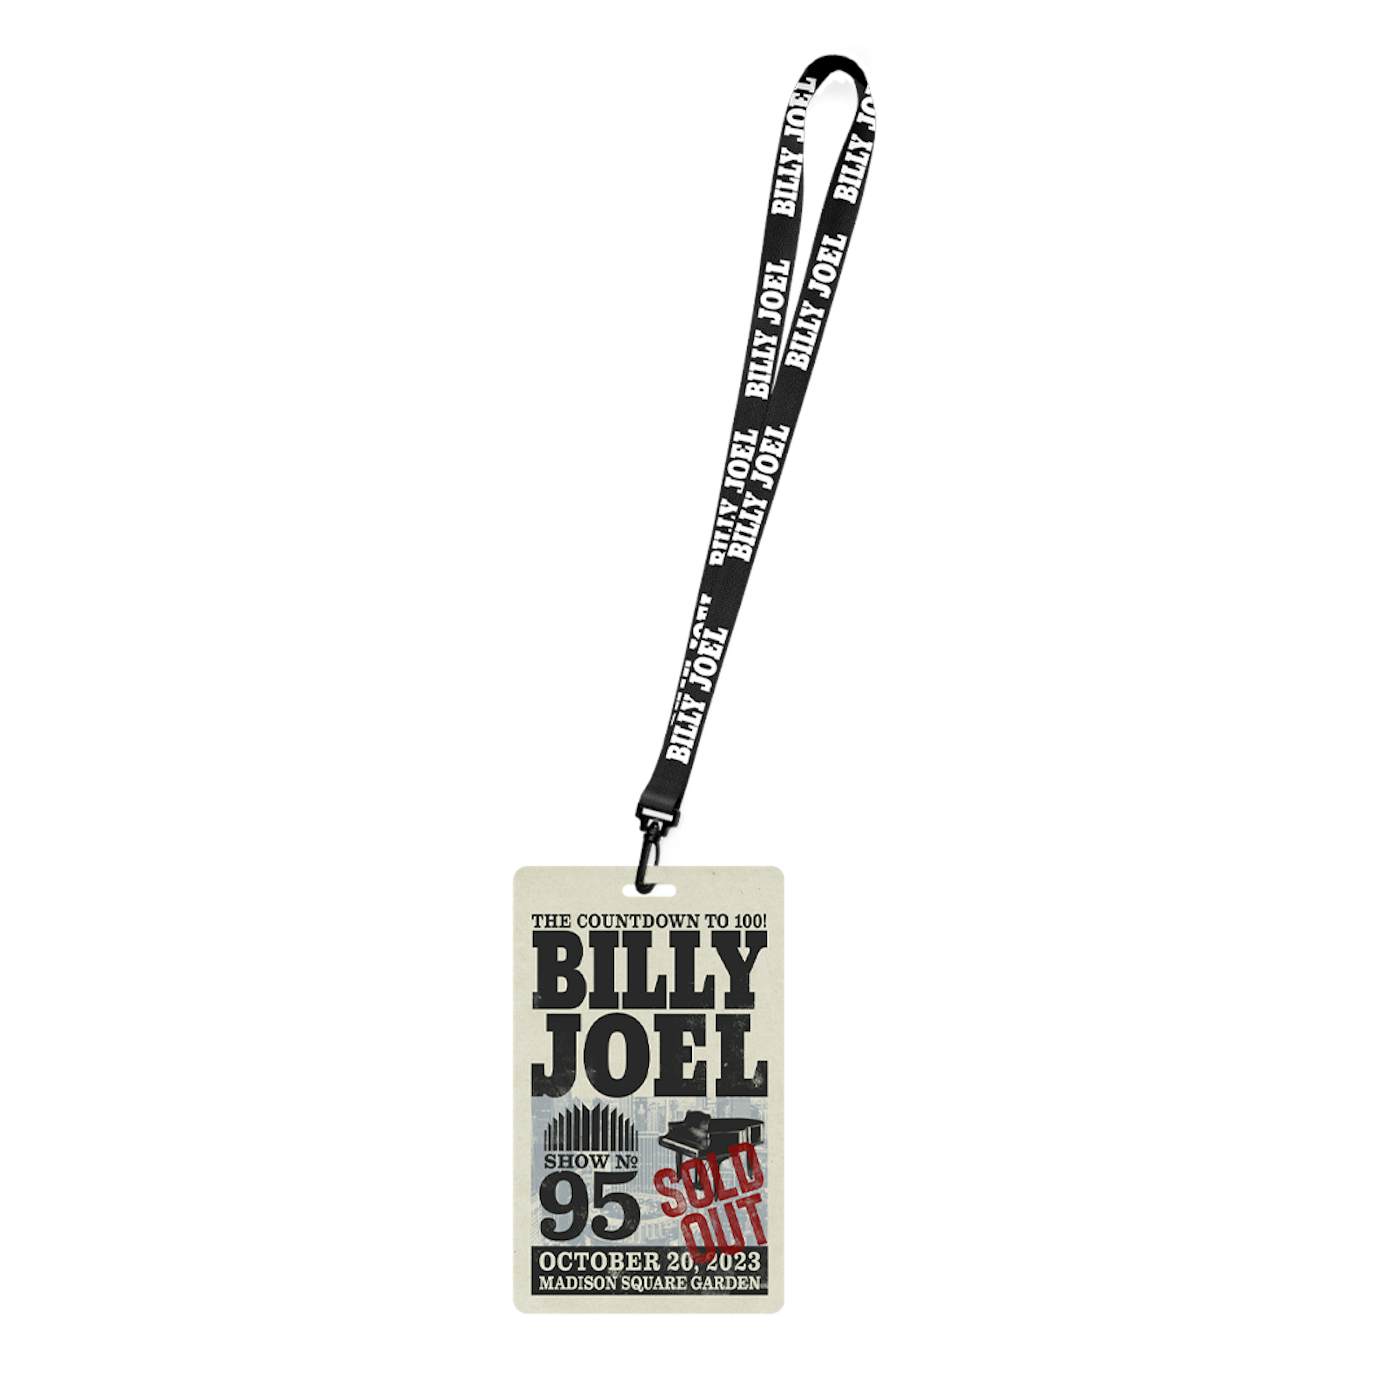 Billy Joel "10-20-23 MSG Event" Collectible Laminate & Lanyard - Only 250 Available